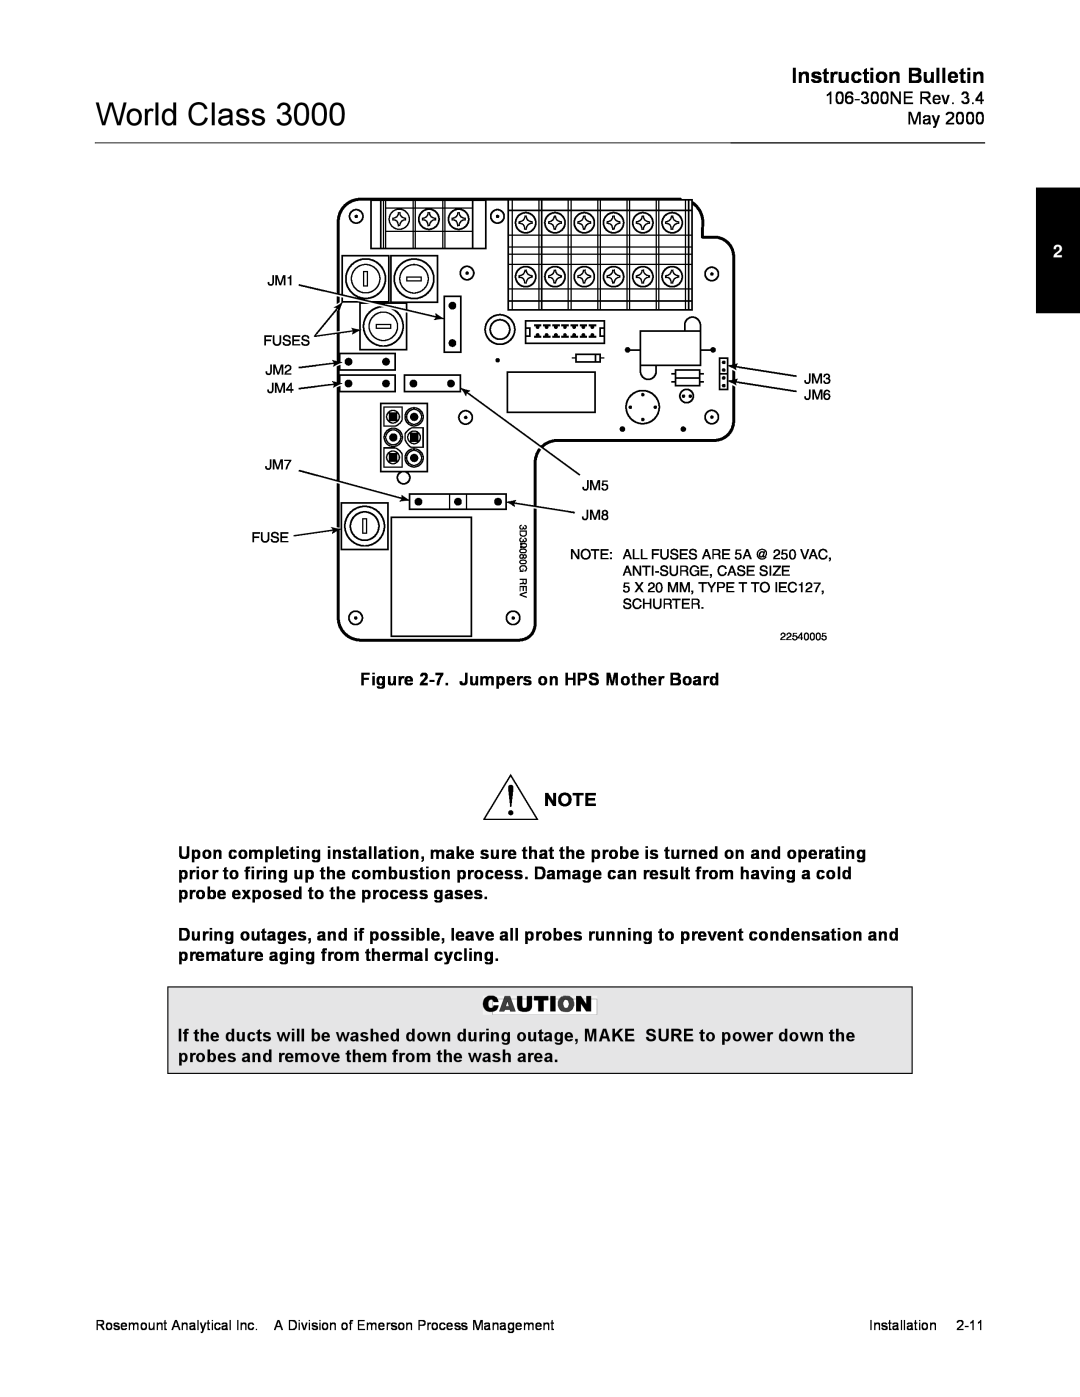 Emerson 3000 manual Instruction Bulletin, 7.Jumpers on HPS Mother Board 